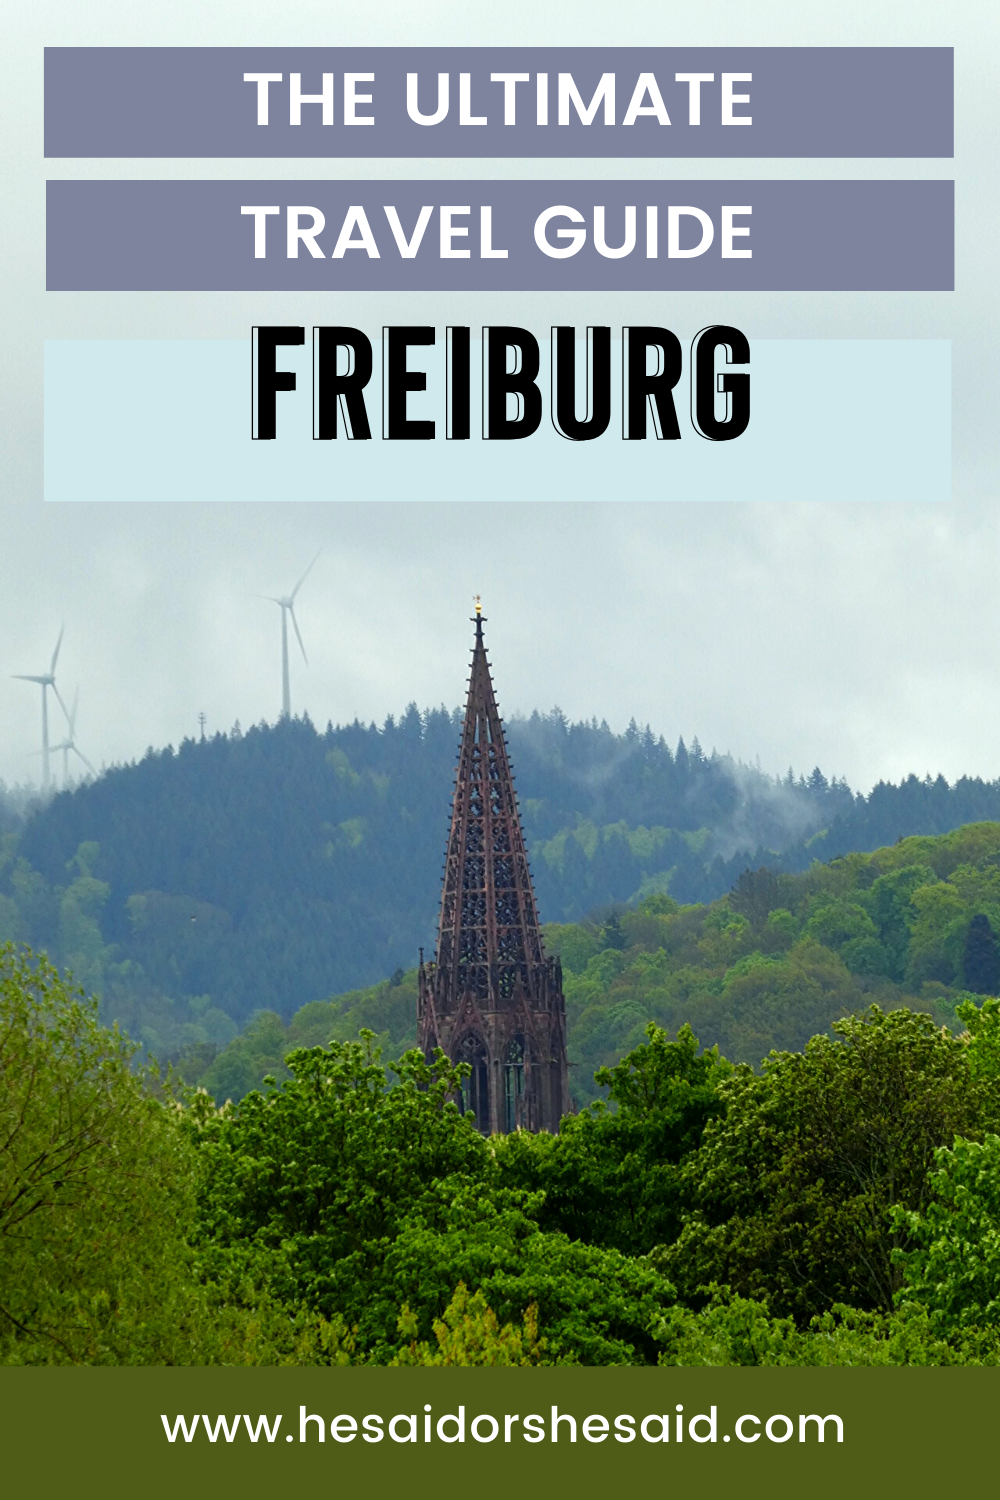 The ultimate travel guide to Freiburg Germany by hesaidorshesaid